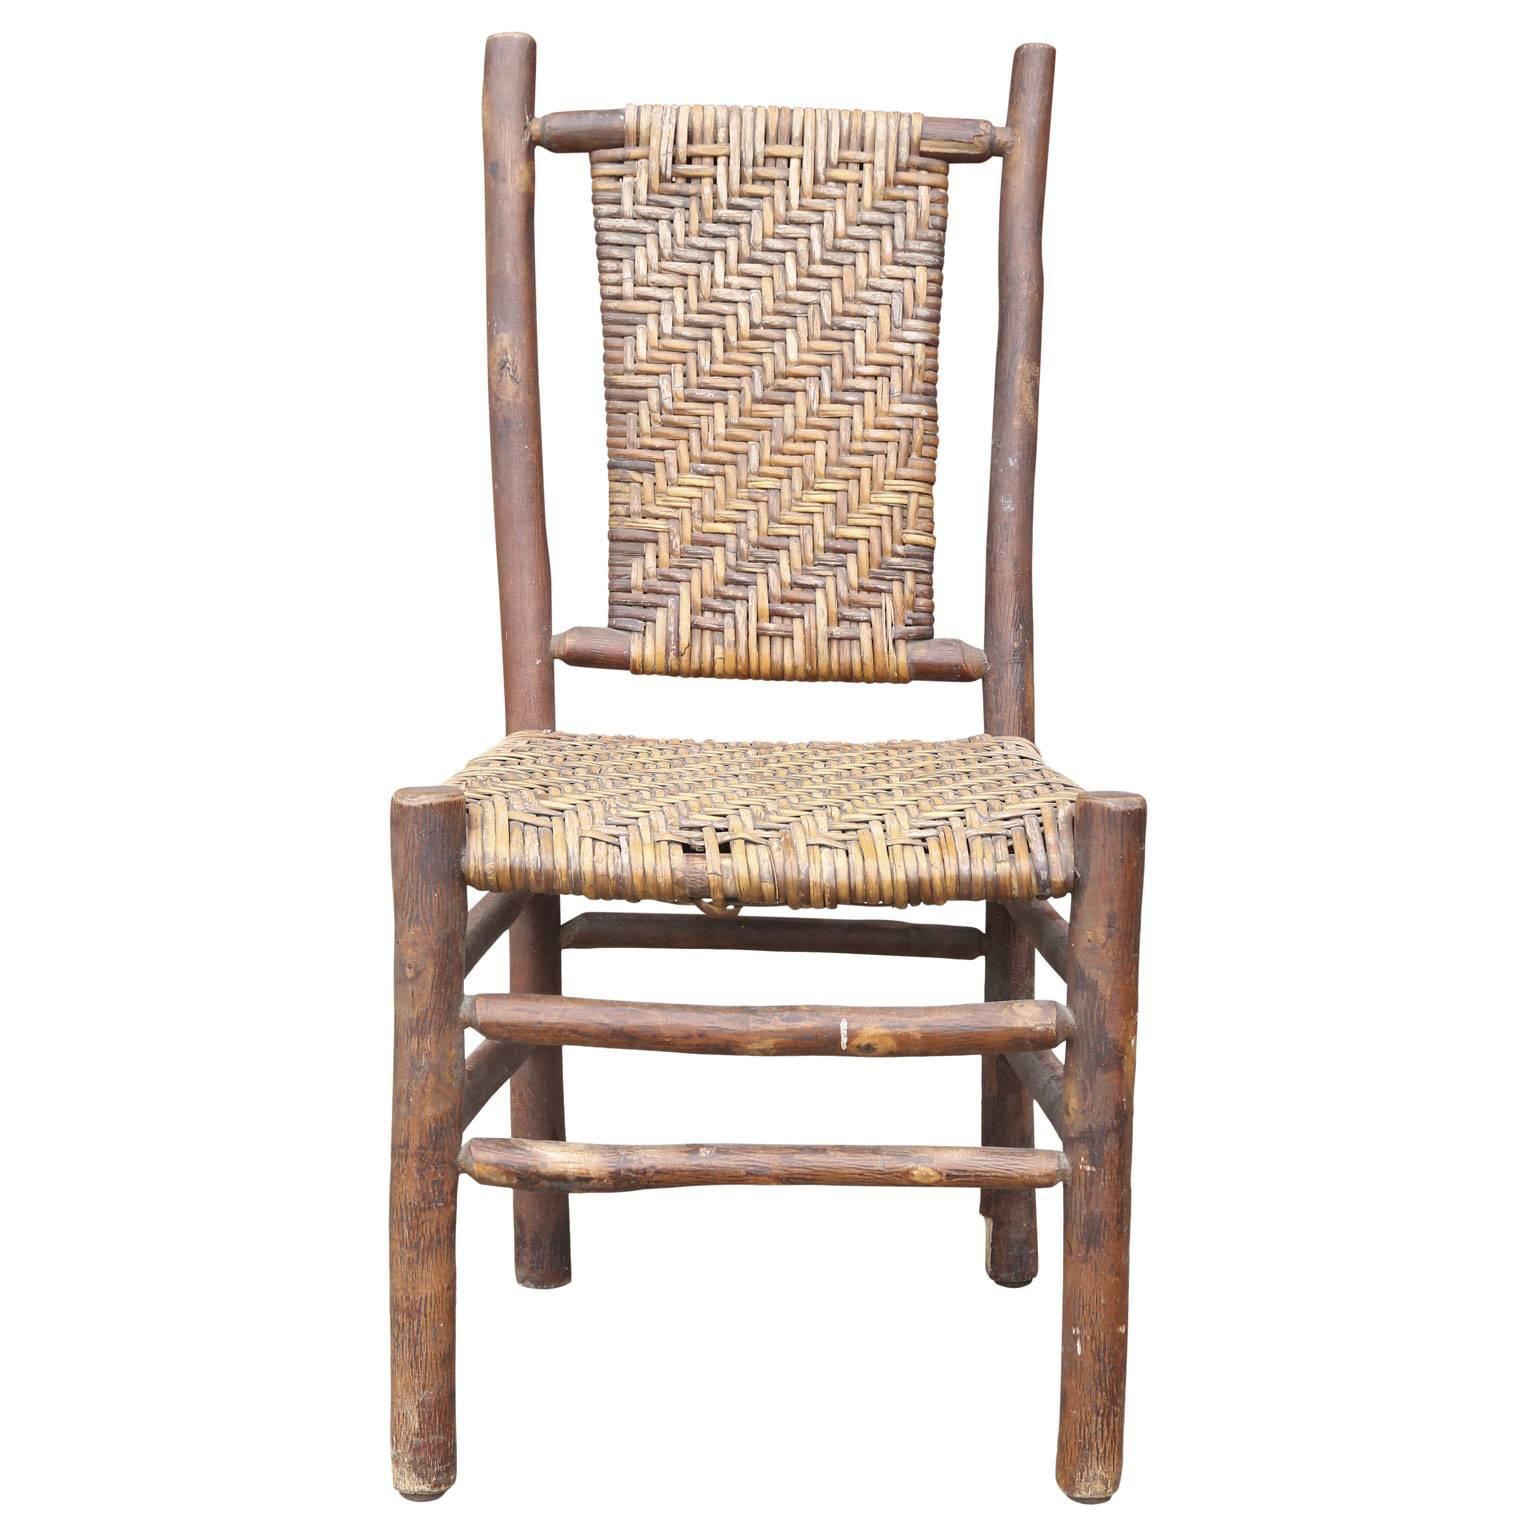 Old hickory side chair, made of natural wood and exposed bark, with its original handwoven seat and back and a beautiful subtle sun-bleached patina. A genuine Folk Art piece signed and created, circa 1933-1942, for the Adirondack civilian